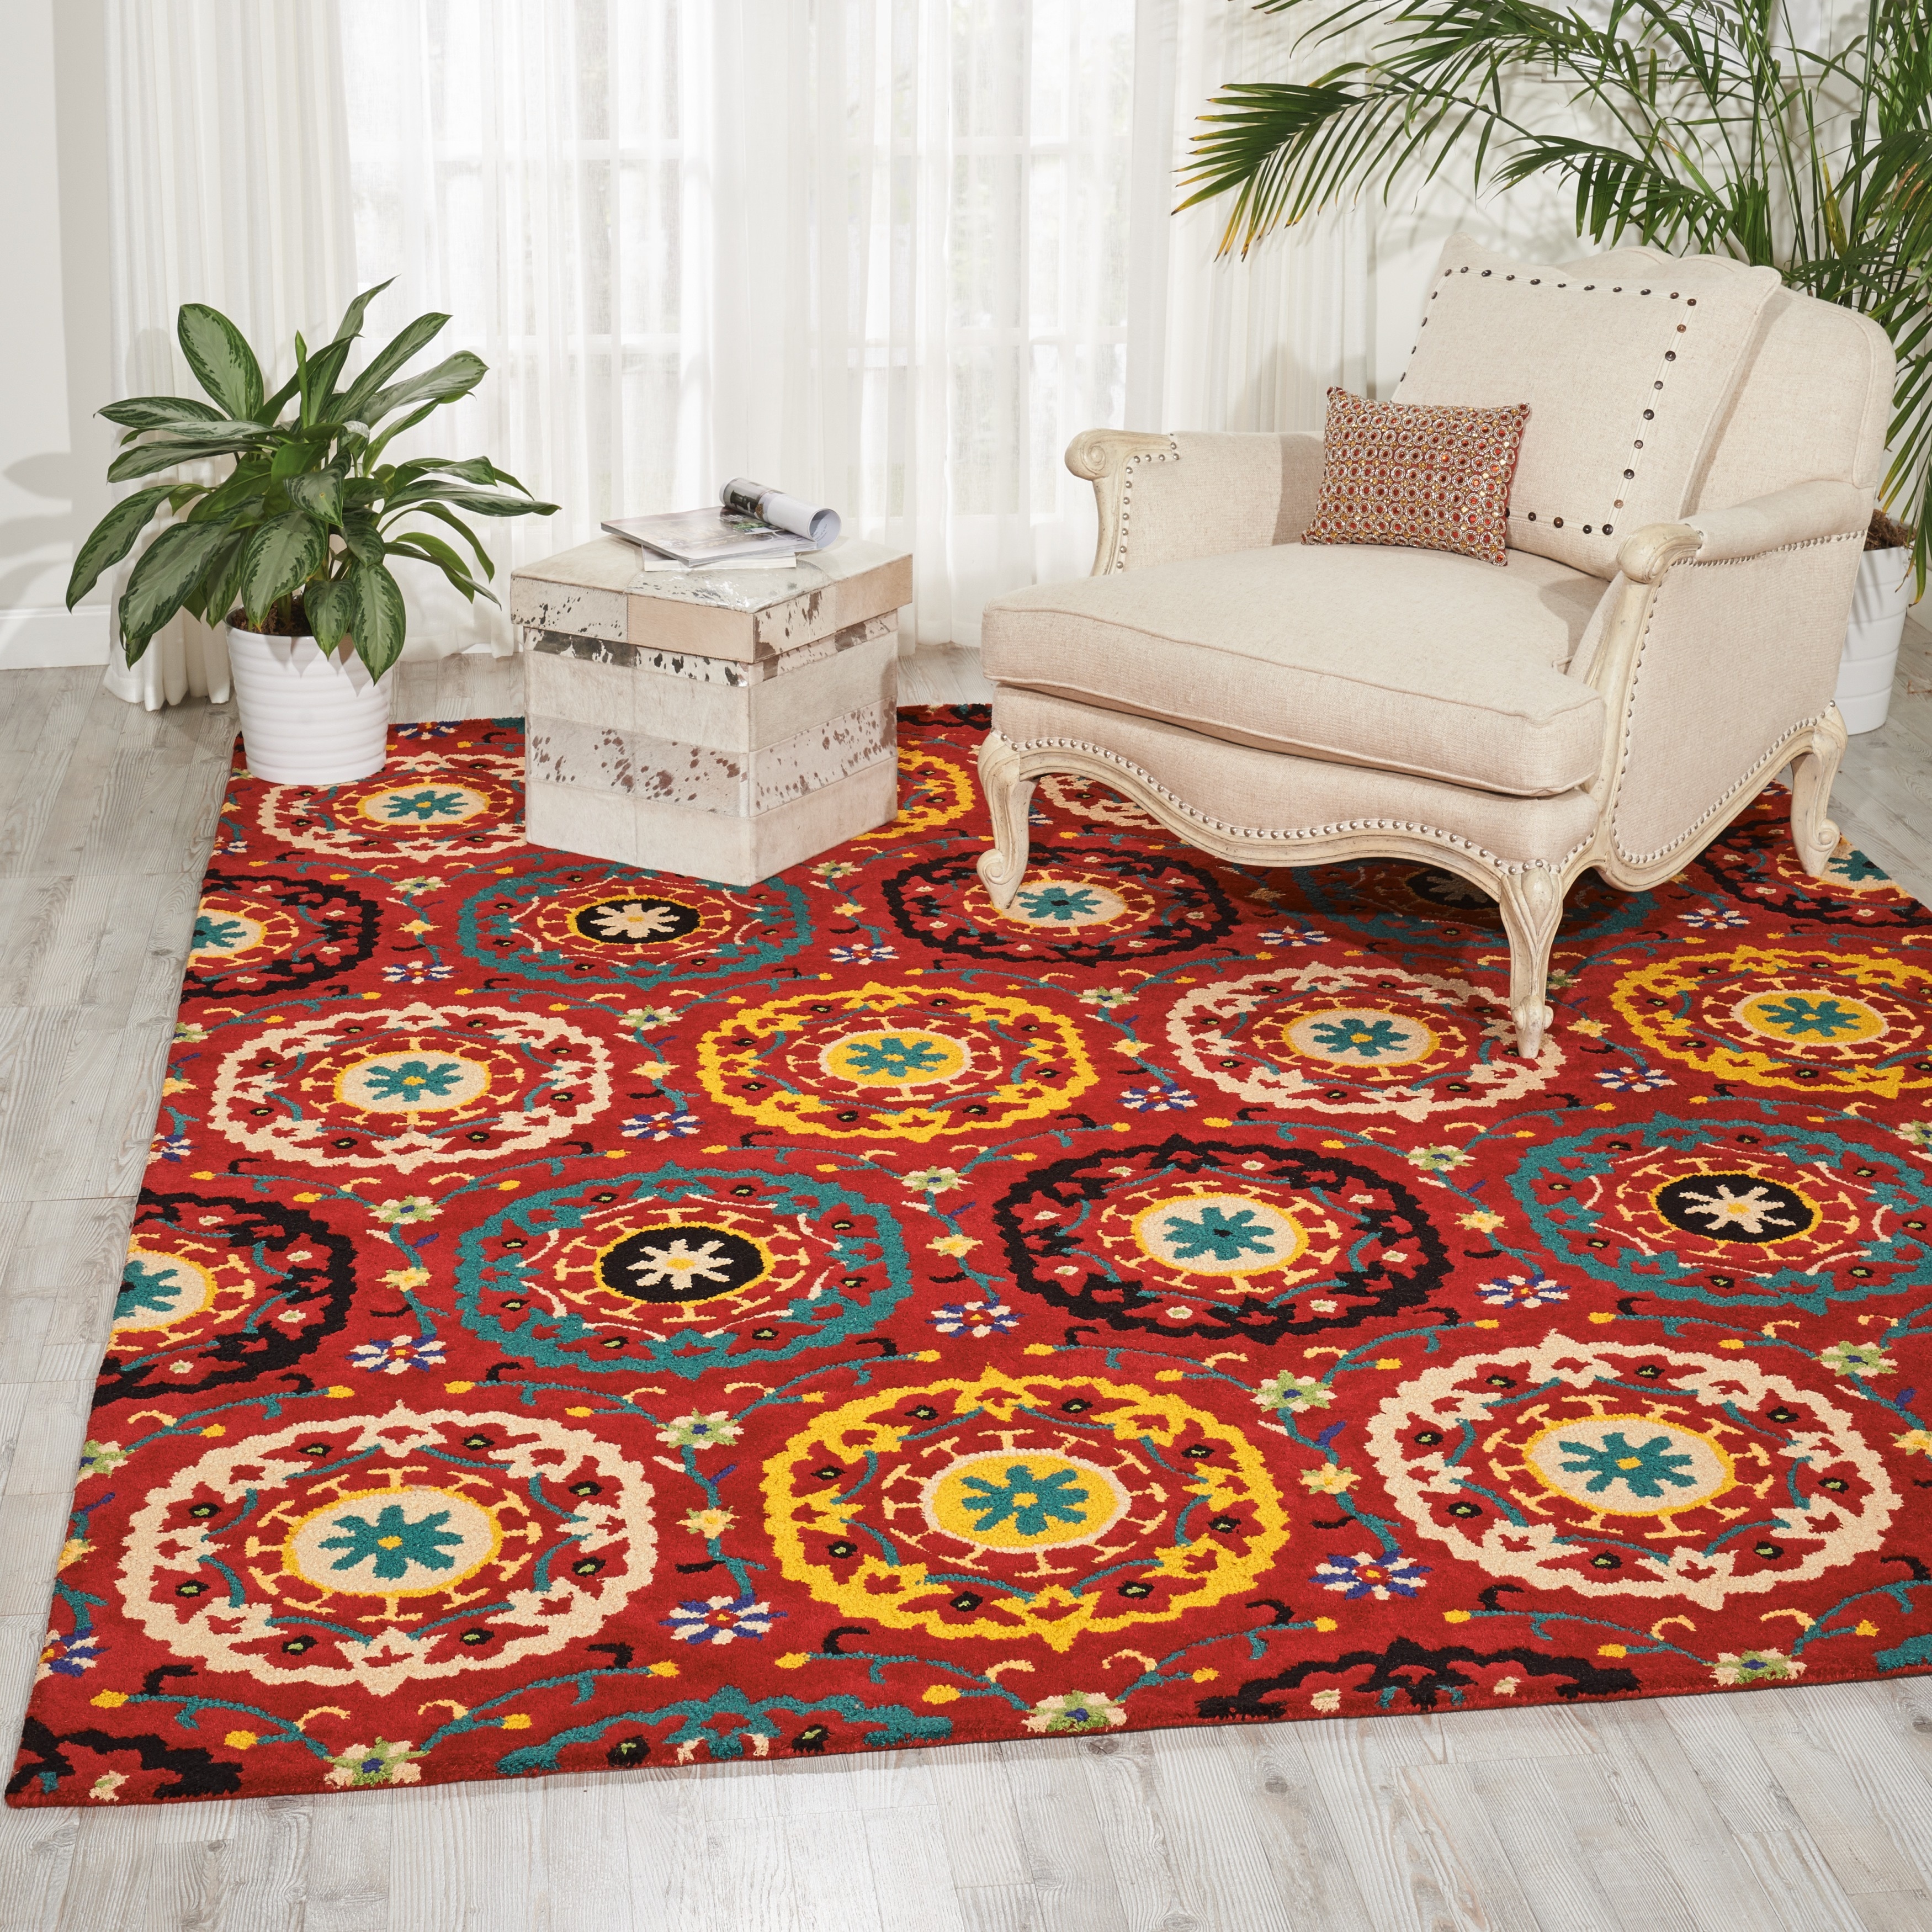 Hand tufted Suzani Red Medallion Wool Rug (53 x 75) Today $250.99